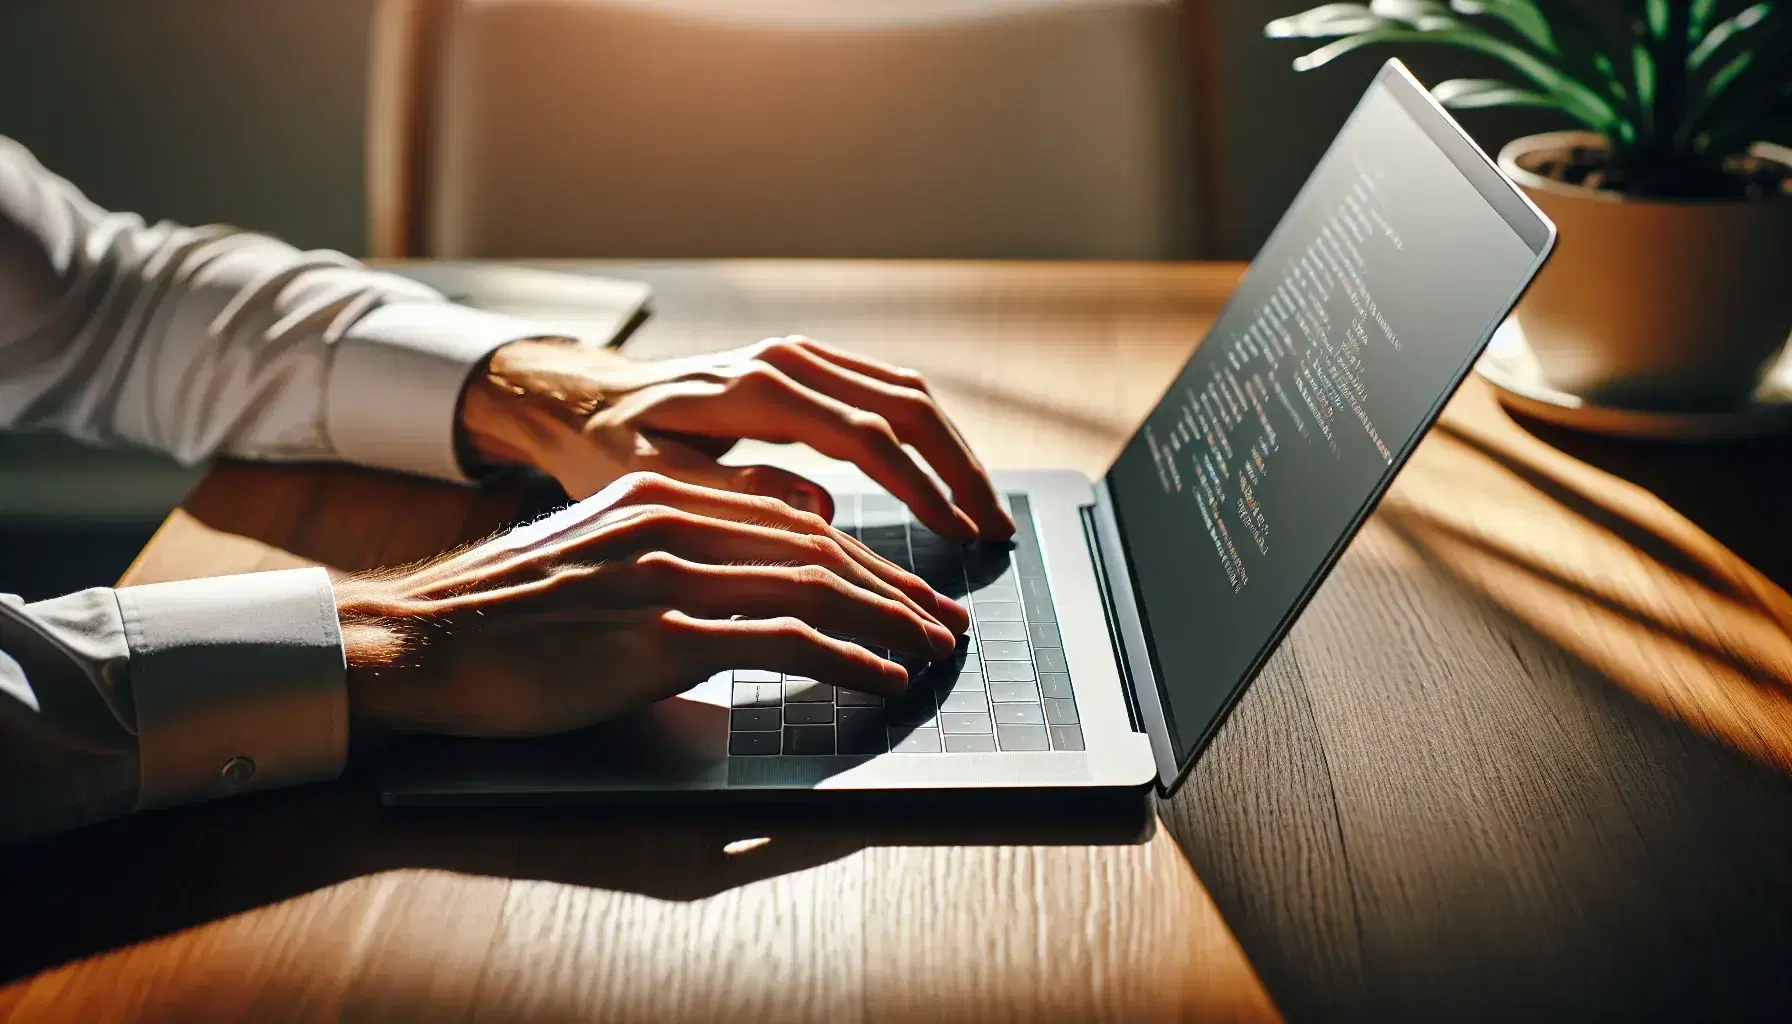 Hands typing on a laptop keyboard on wooden desk with blurred green plant in the background, bright and focused environment.